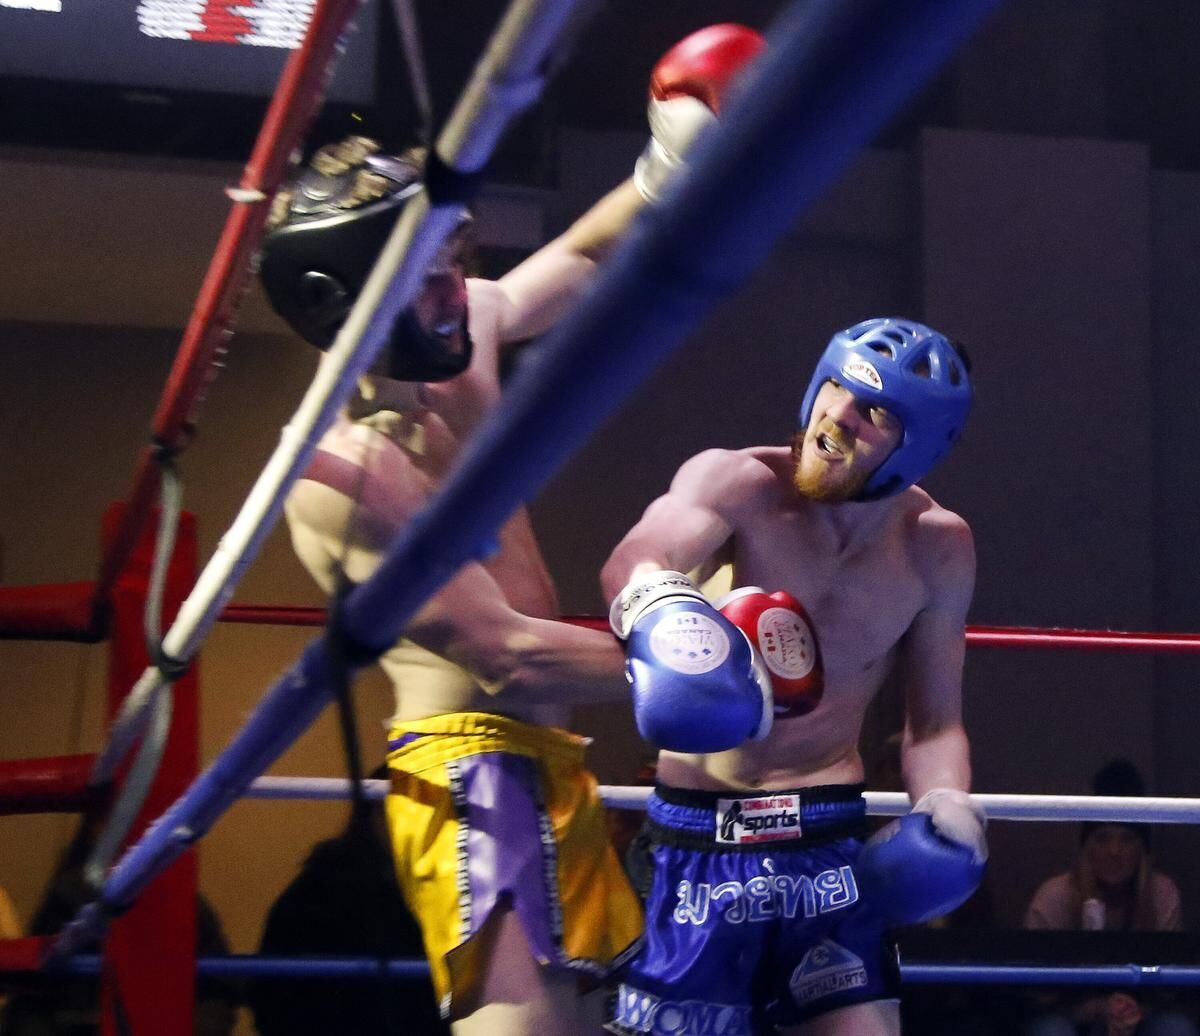 Peterborough crowd roars for young kick-boxers in final round Adult Pic Hq